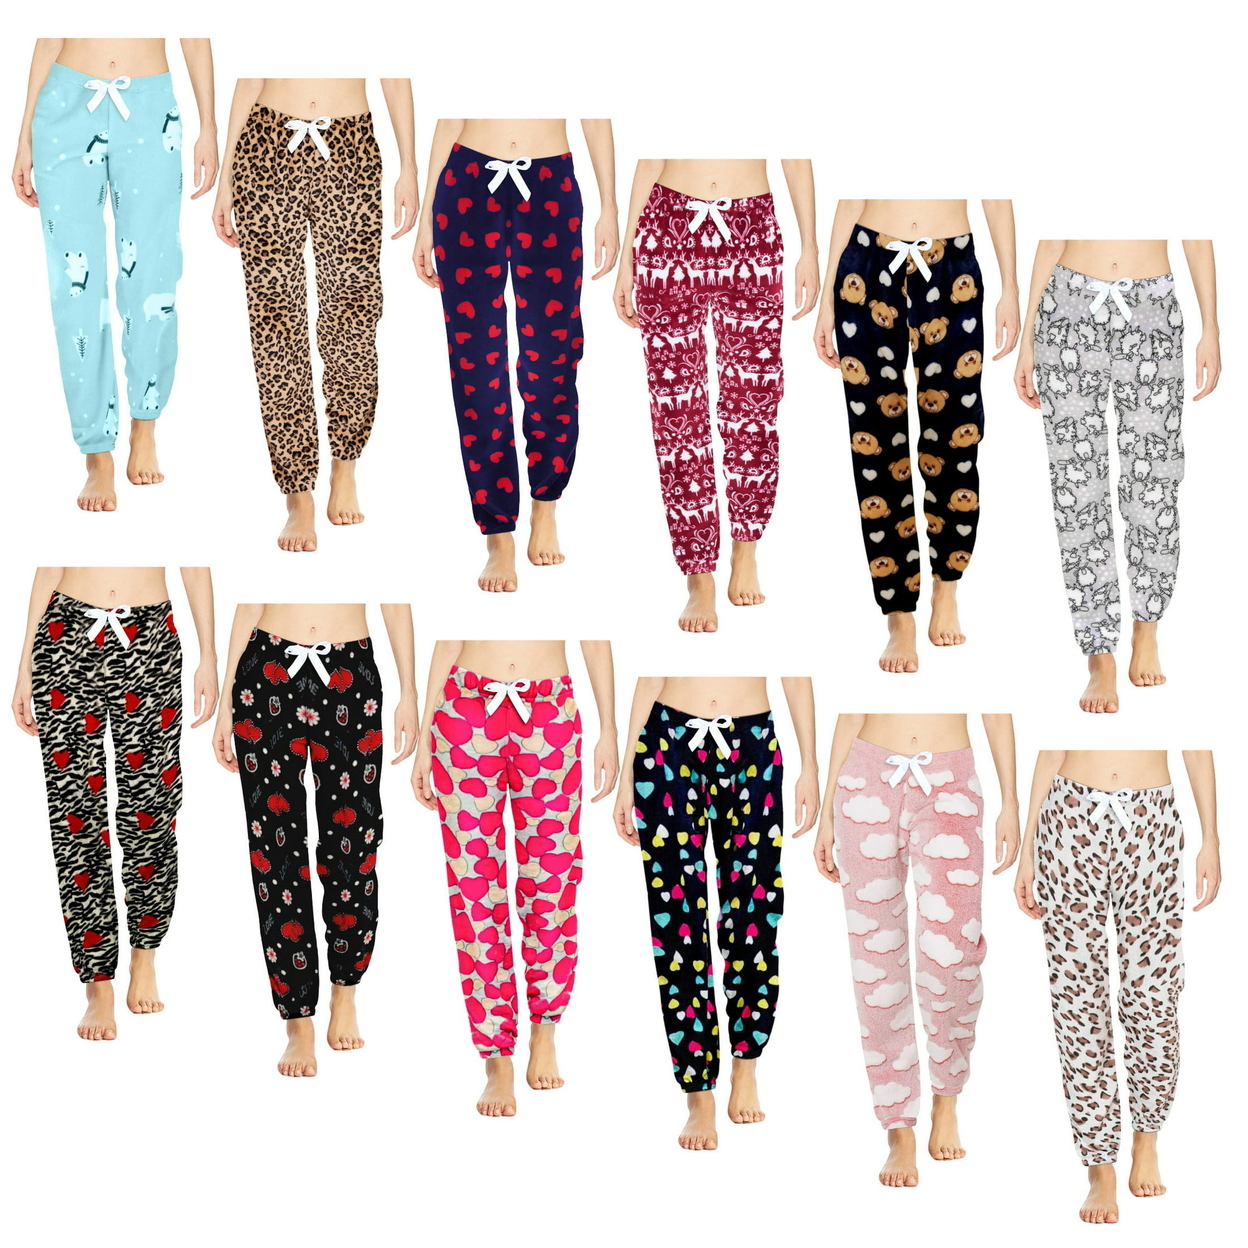 Multi-Pack: Women's Printed Ultra-Soft Comfy Stretch Micro-Fleece Pajama Lounge Pants - 1-pack, Love, Xx-large